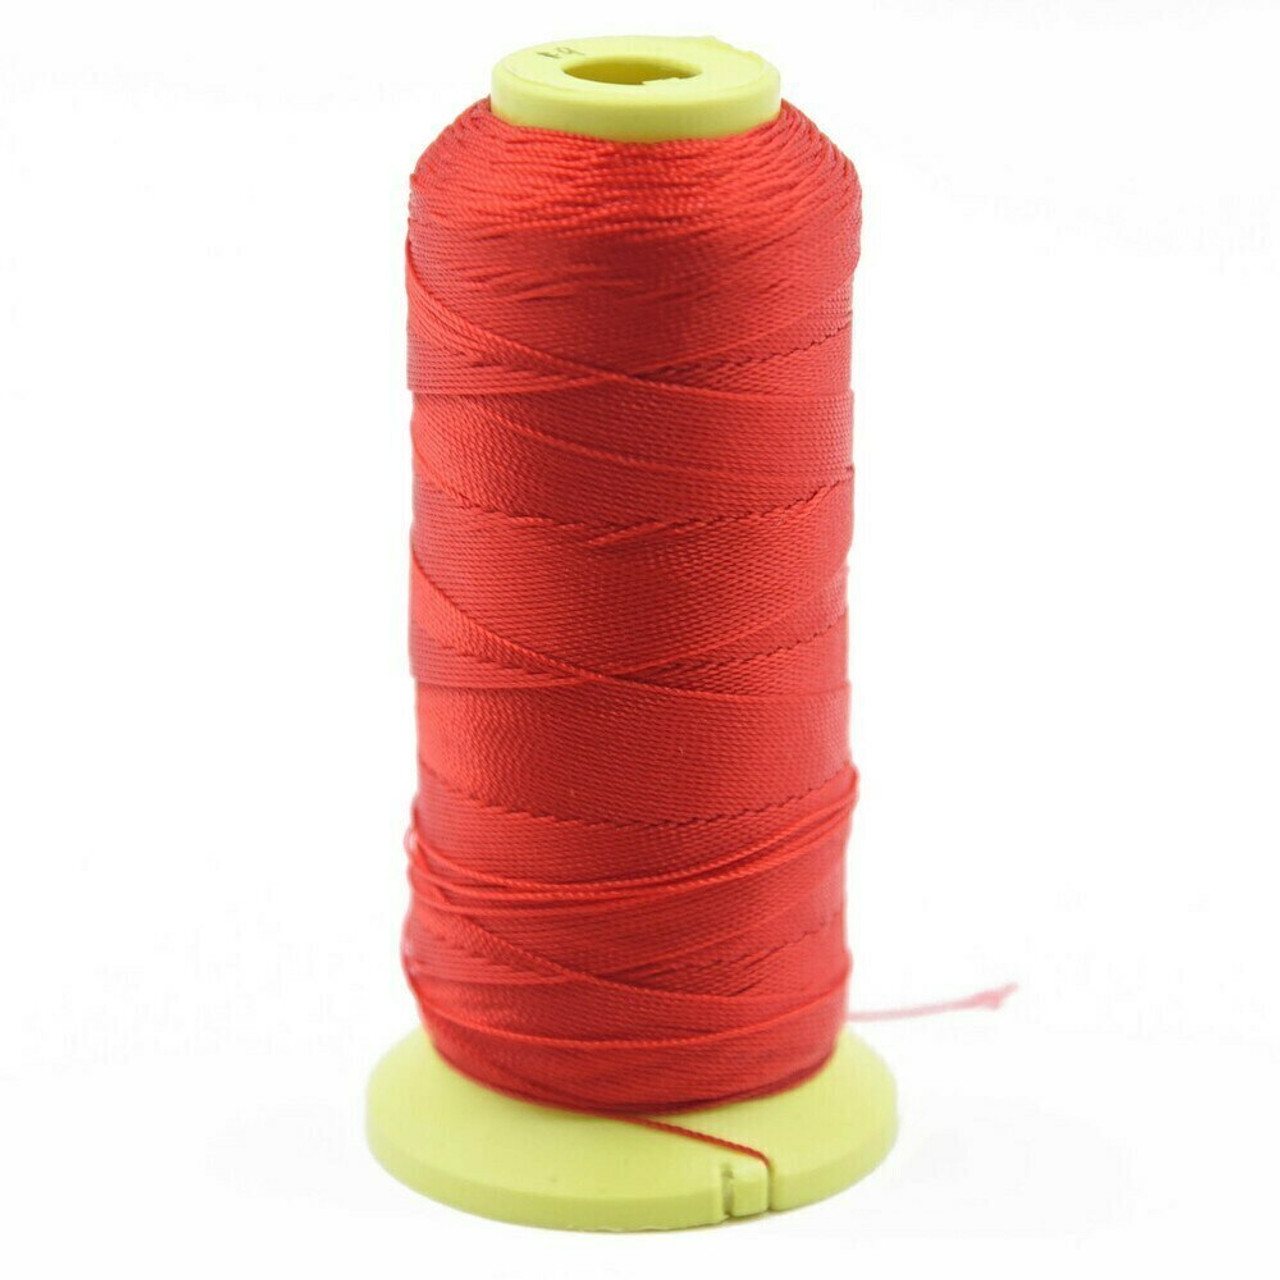 Nylon Cord, #12 (0.9mm), Bright Red, Sold by 350m Spool